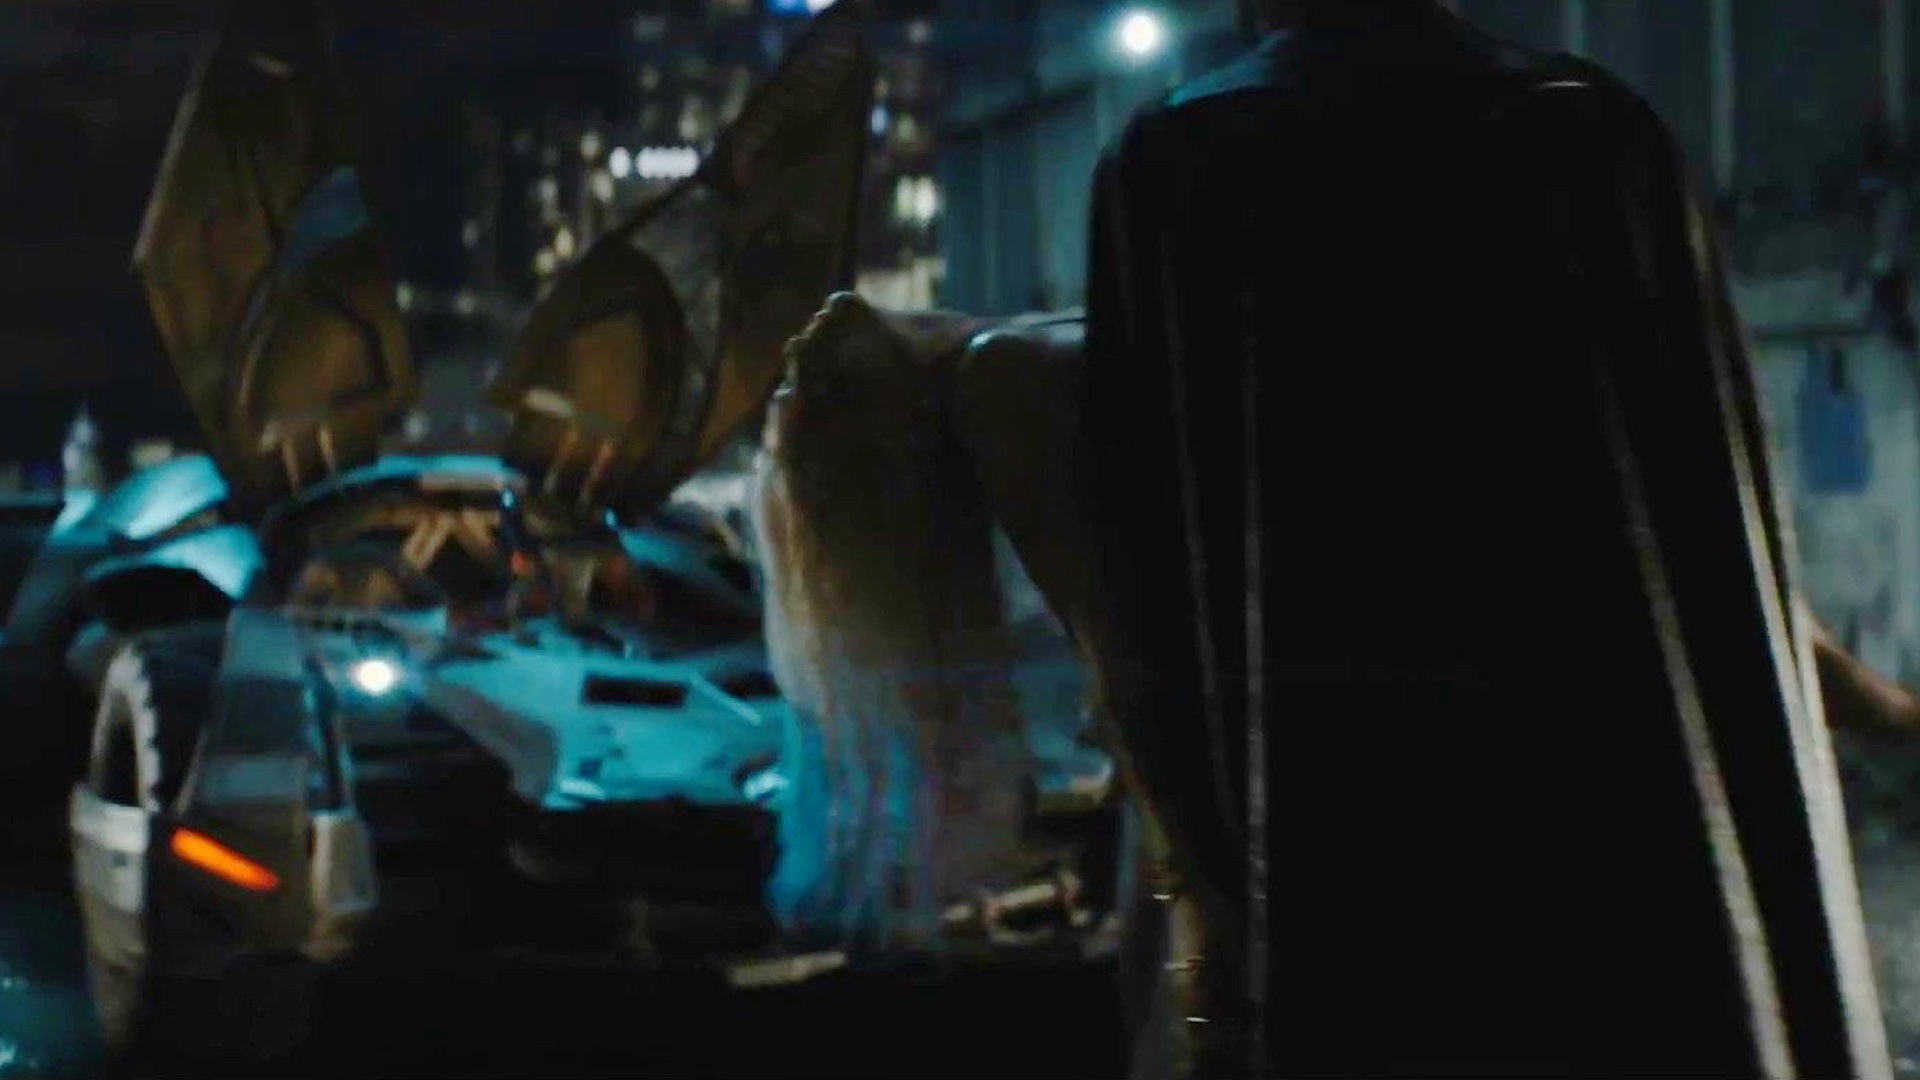 Let's Talk About That Creepy, Awkward Kiss in SUICIDE SQUAD — GeekTyrant